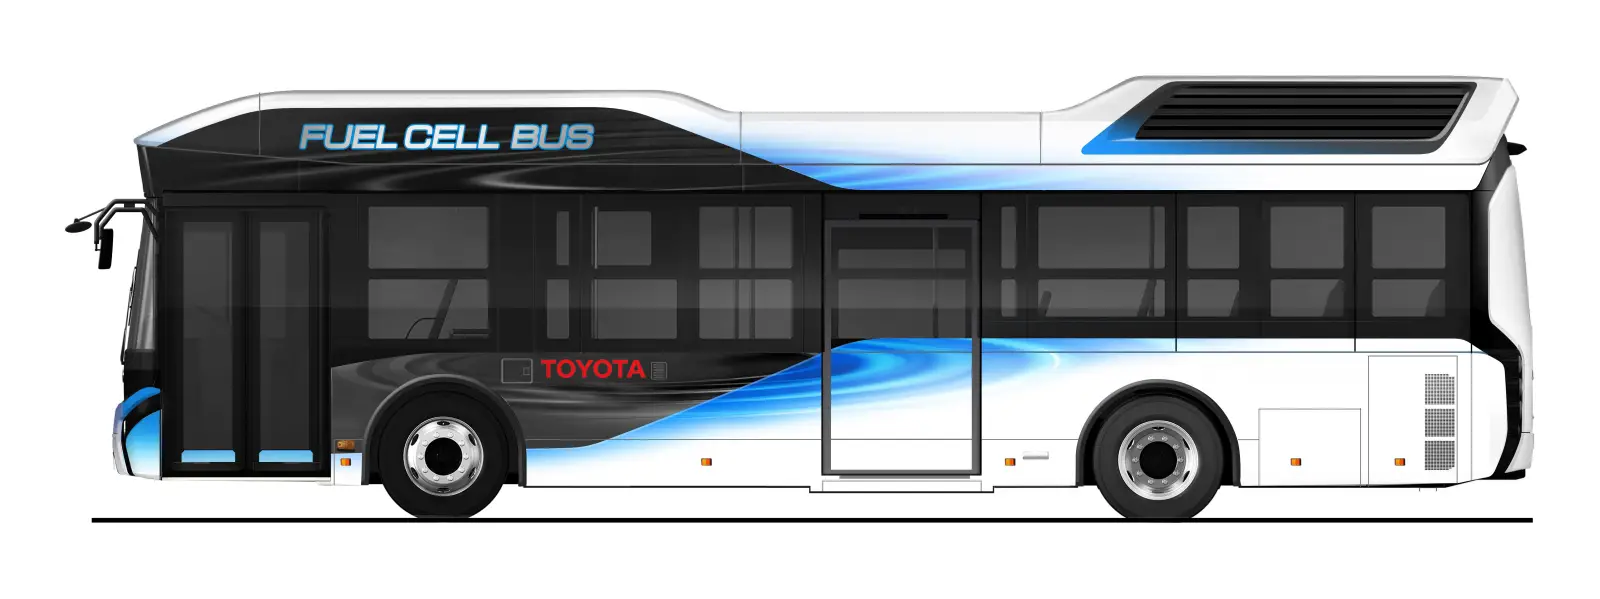 toyota-fuel-cell-bus-2.jpg